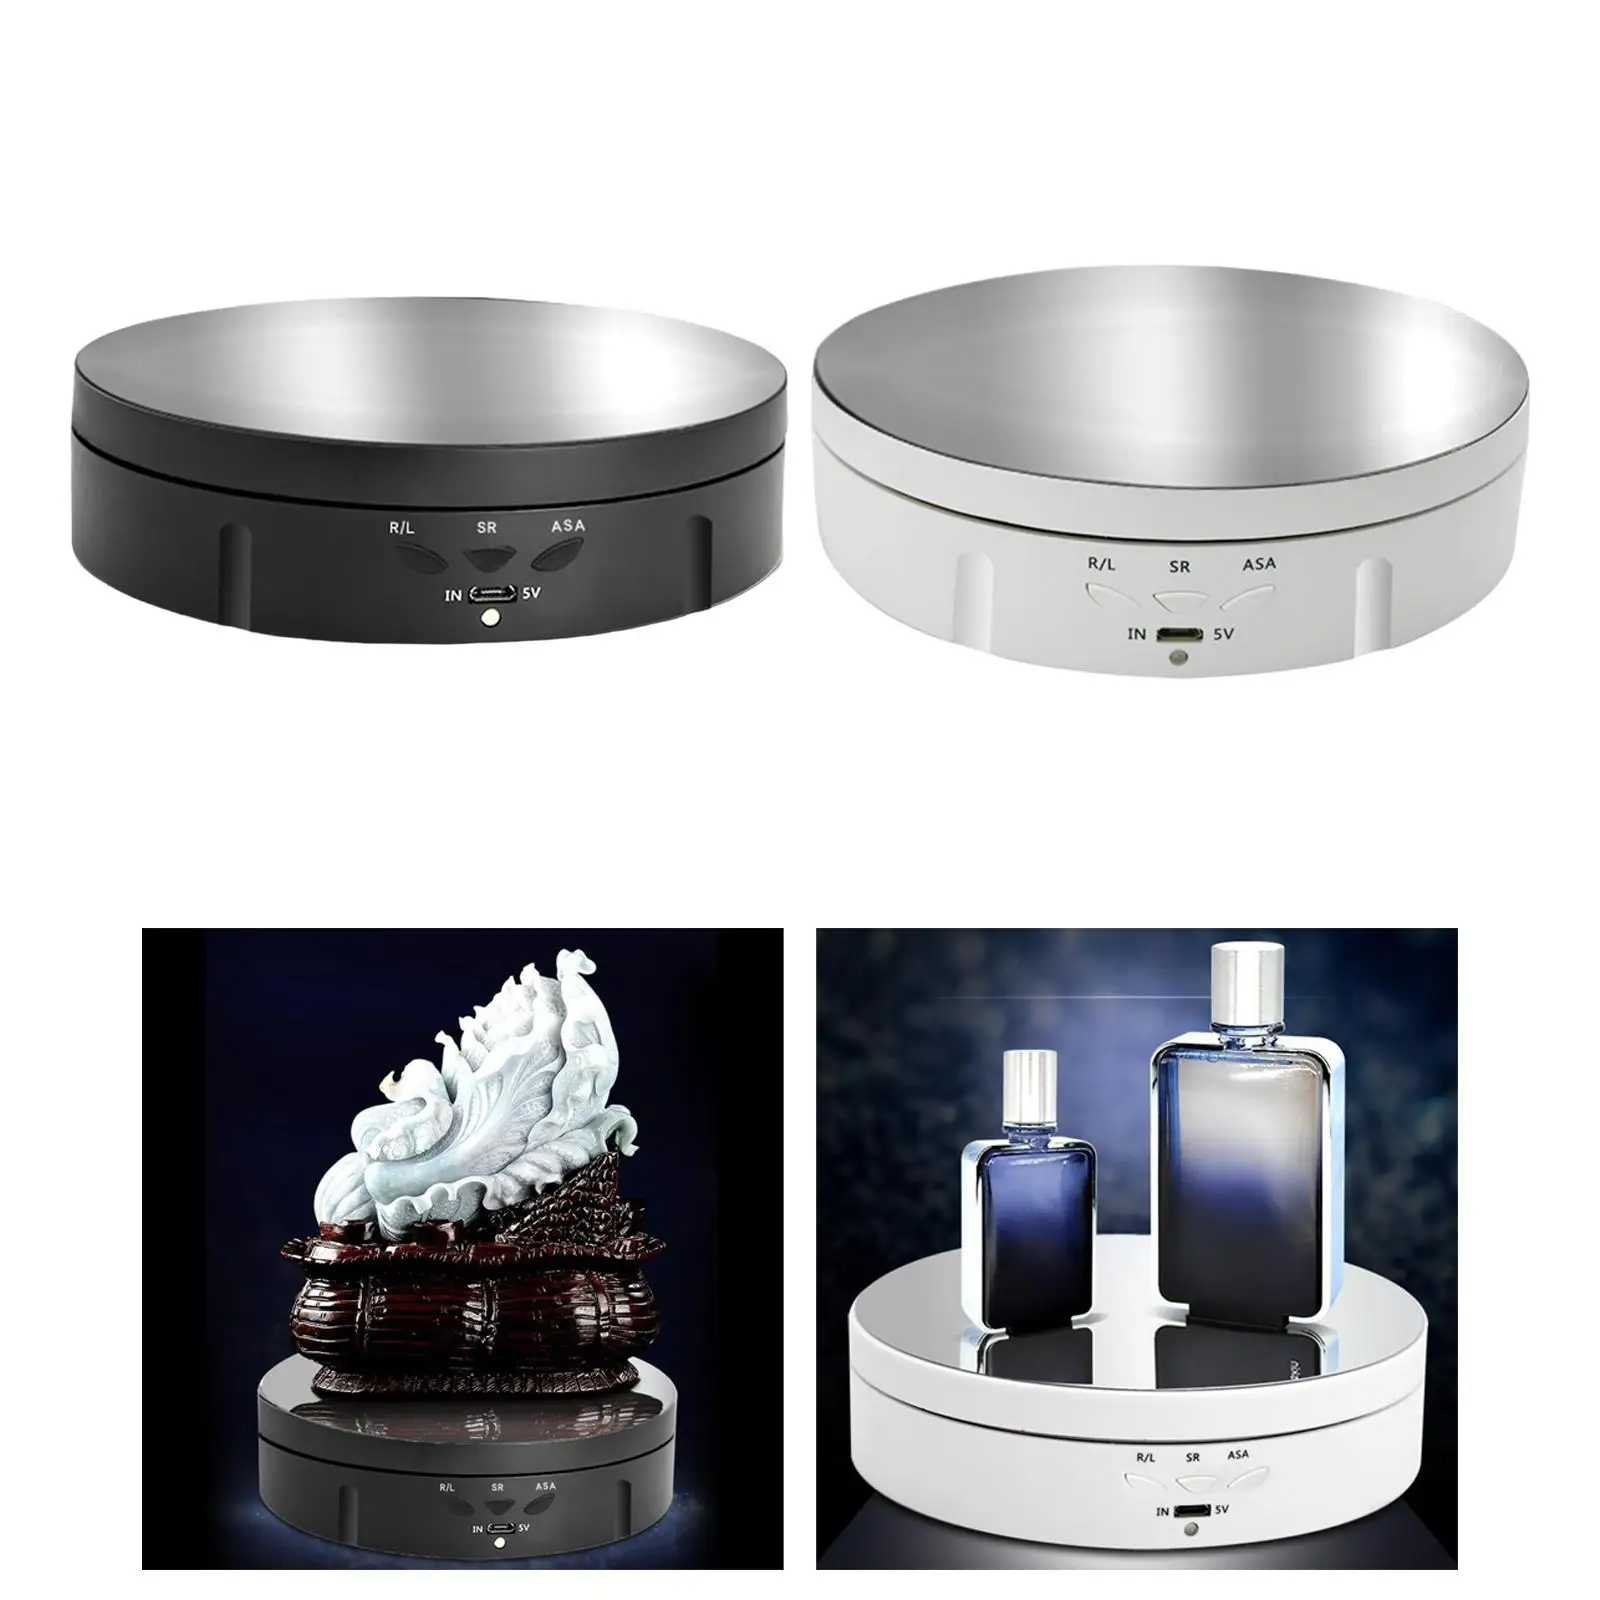 Rotating Turntable Jewelry Holder Motorized Rotating Display Stand for Photography Products Shows Jewelry Watch 3D Models Cake